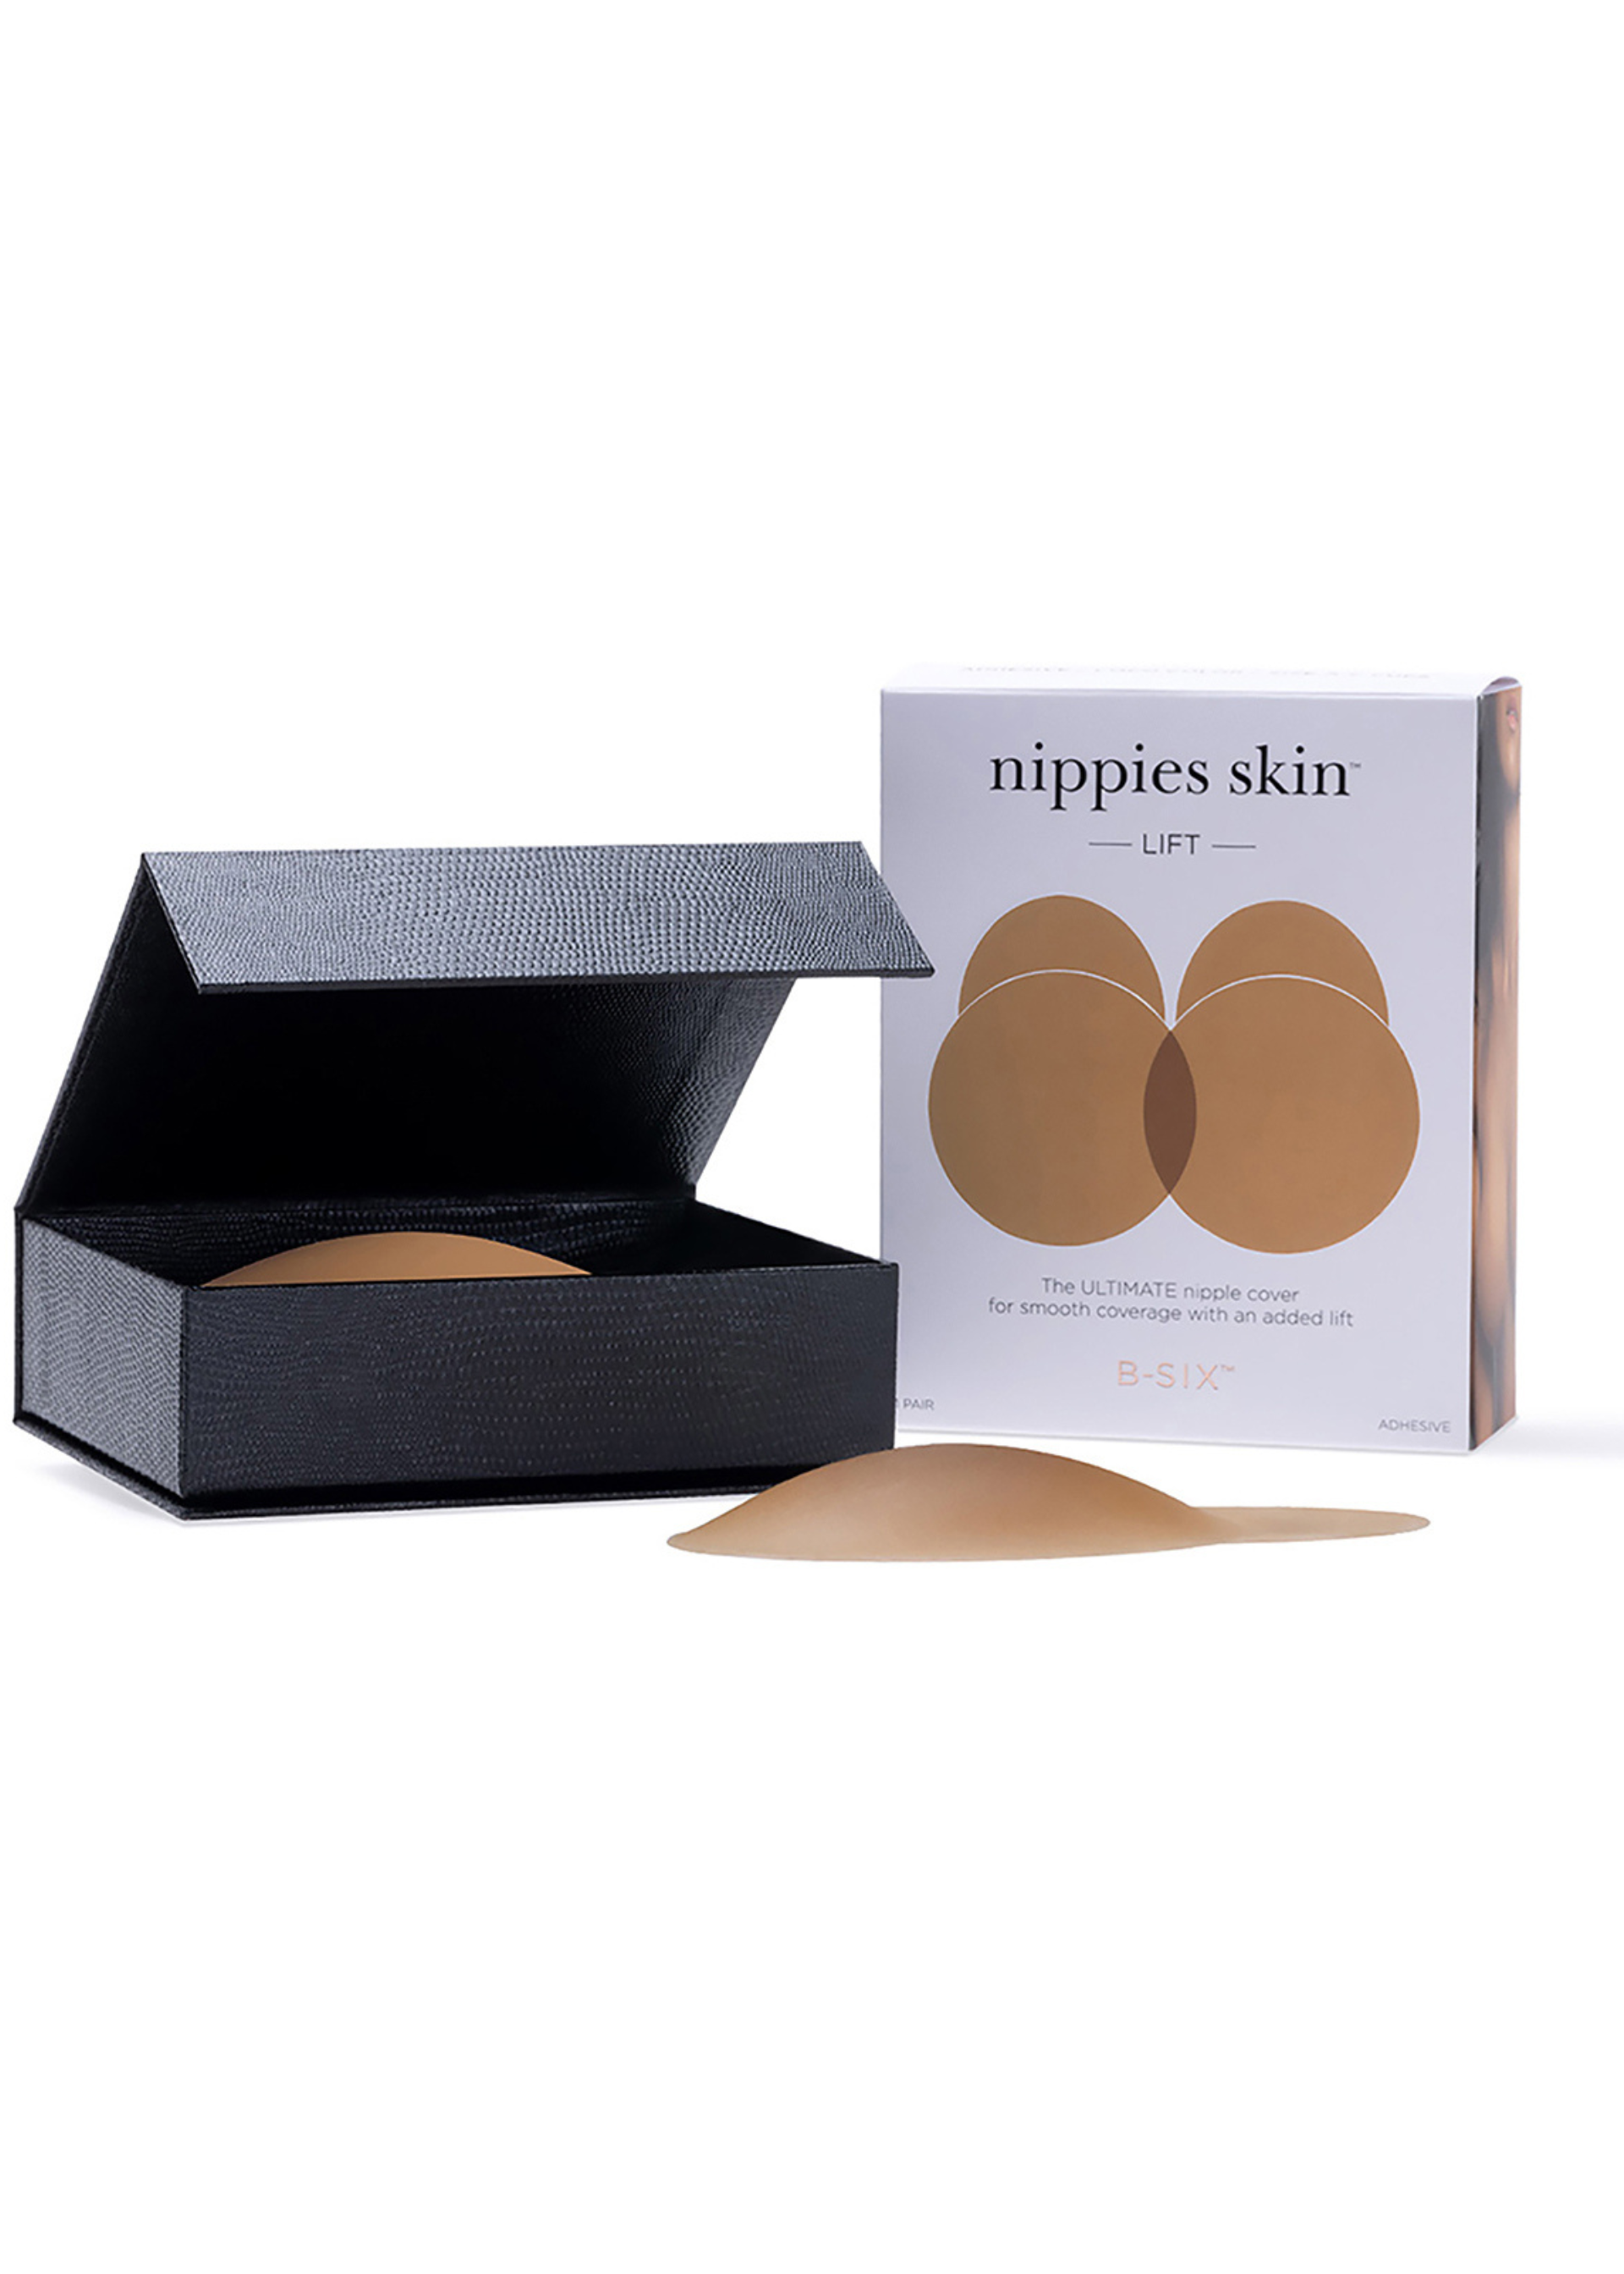 Bristols 6 Adhesive Nippies Skin Covers In Coco